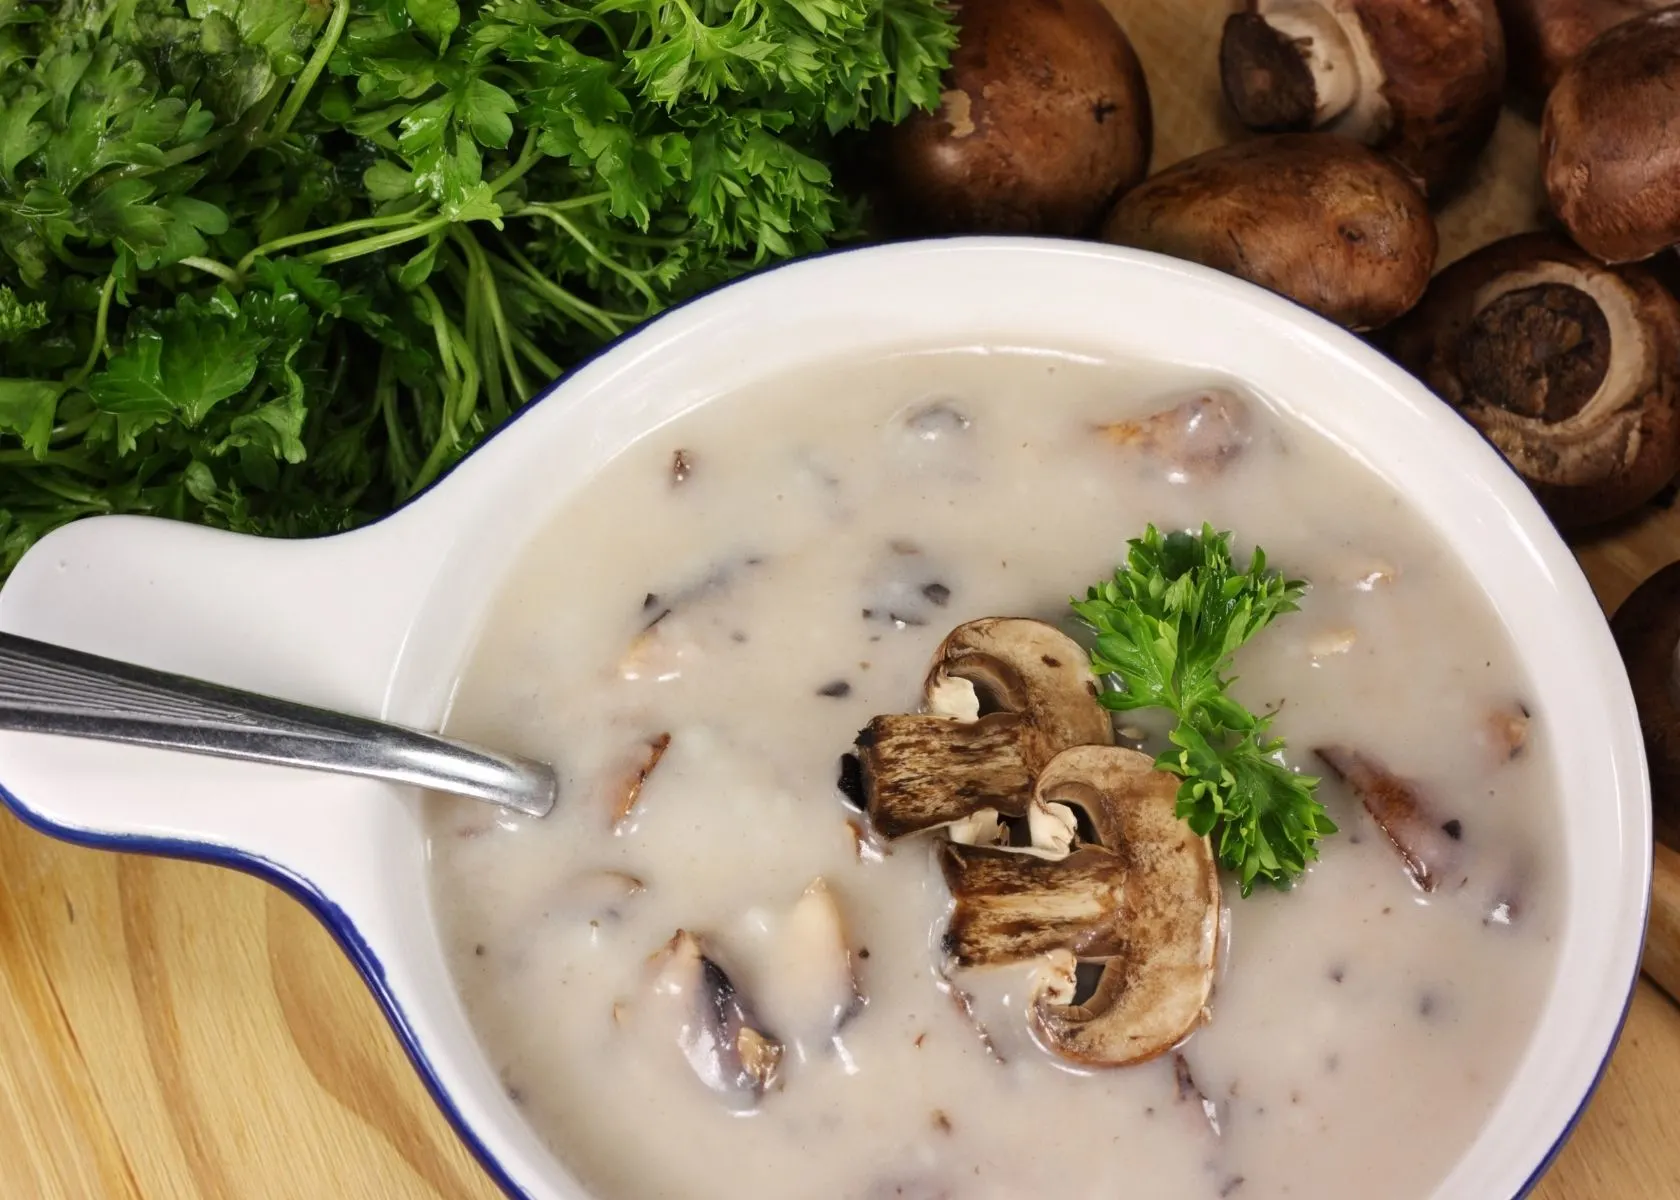 Cream of mushroom soup in white cook pot with green garnish and mushrooms on top.